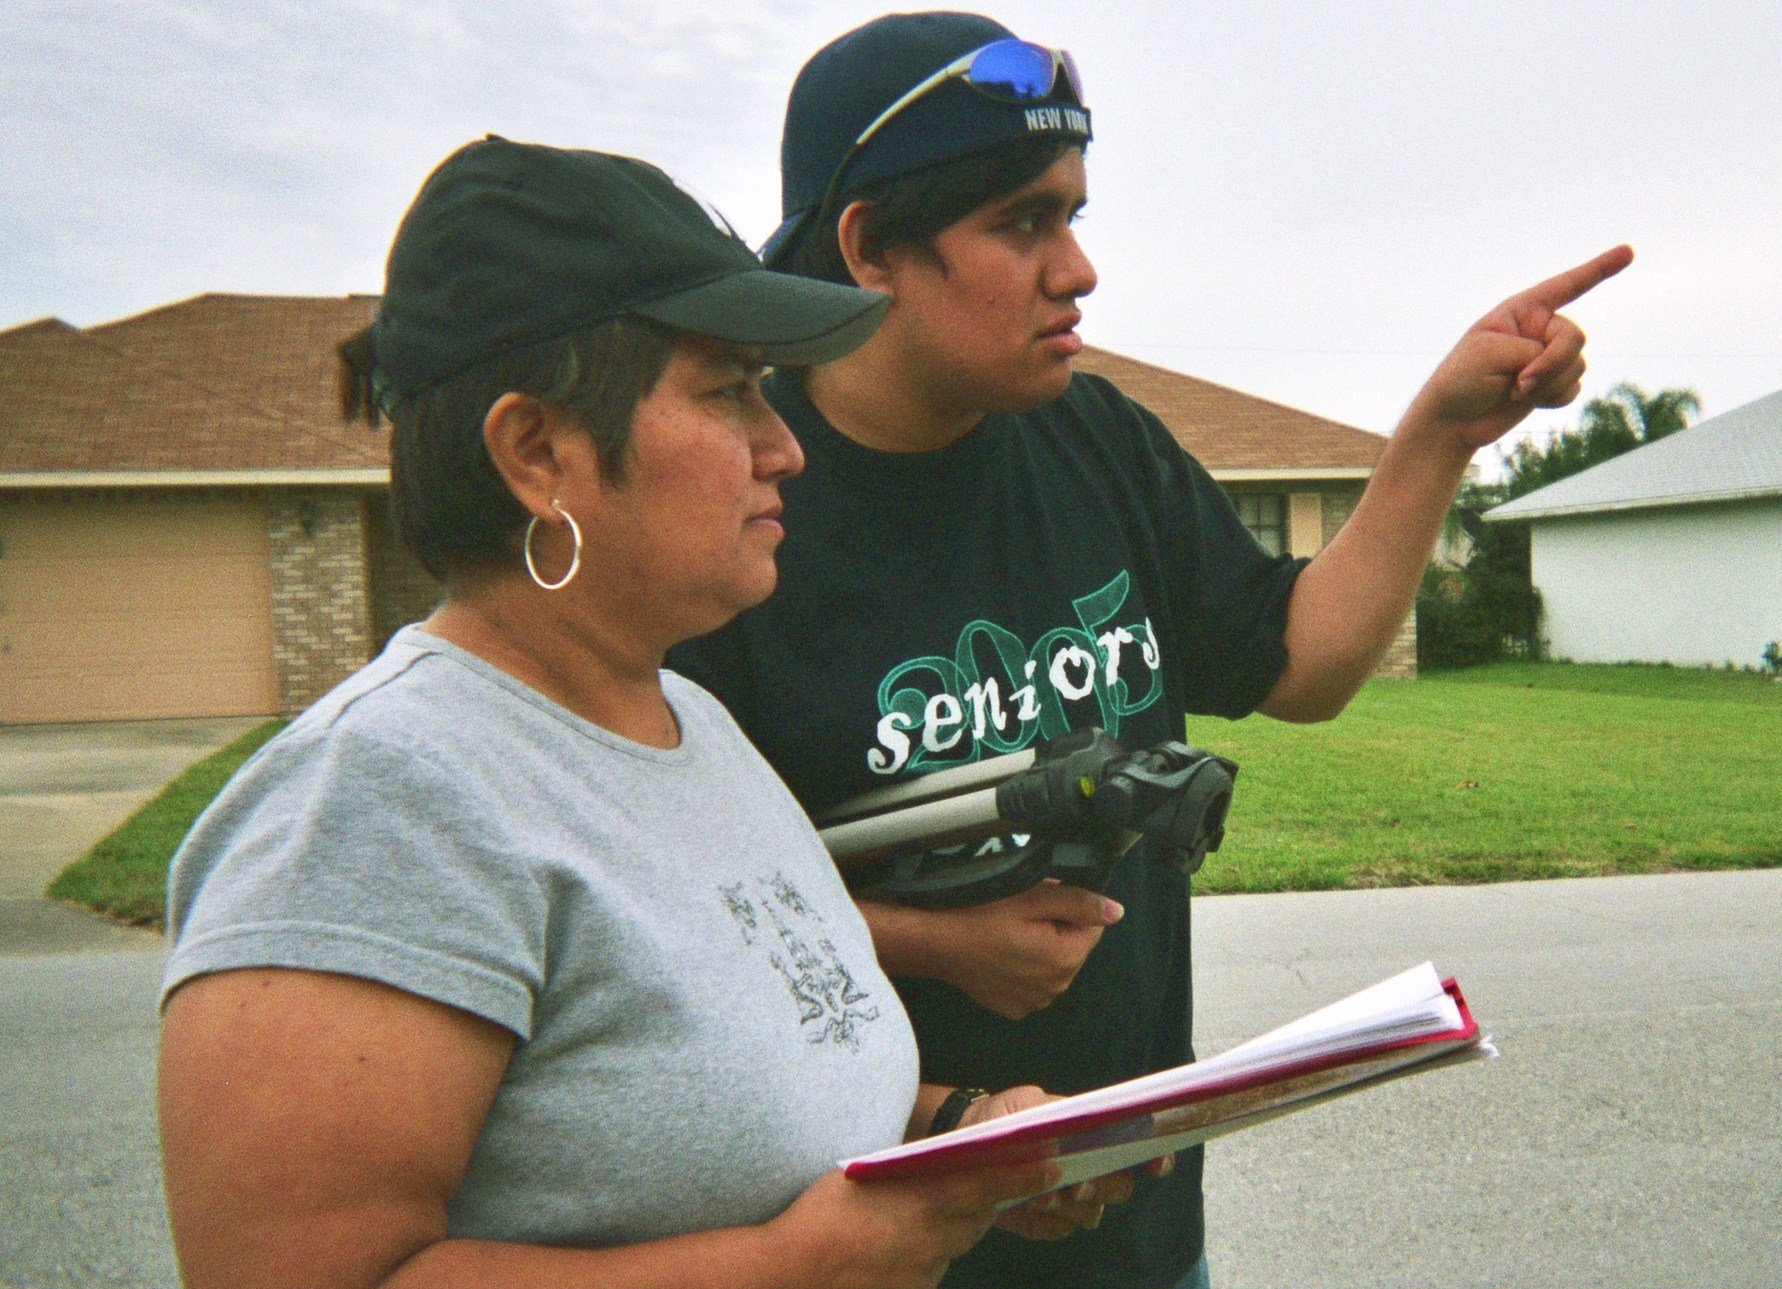 Scott Mena giving direction to Liz Mena during the filming of REST IN PEACE.